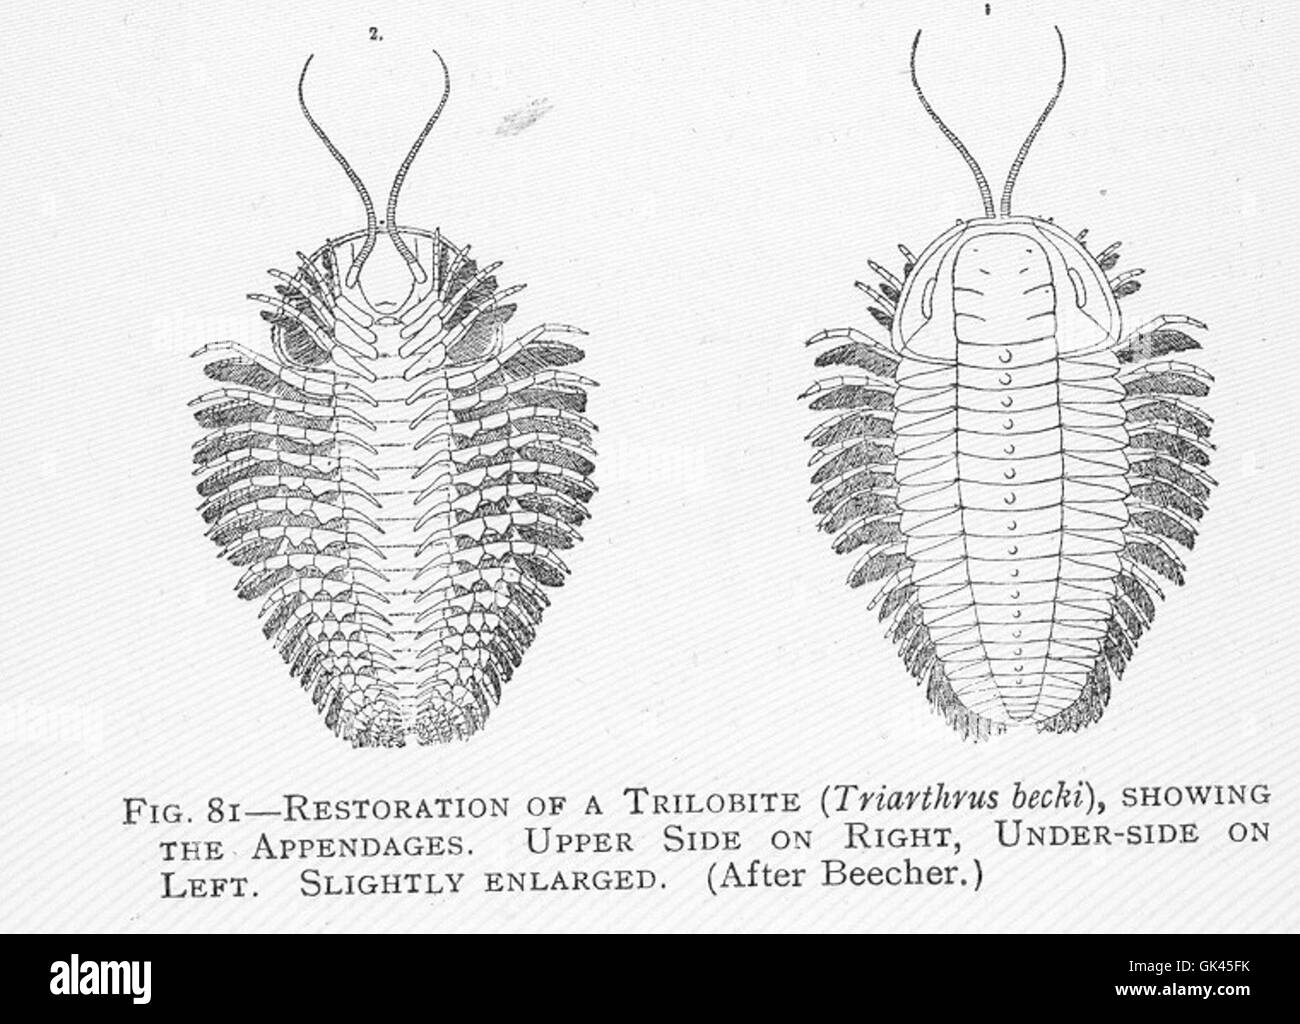 46279 Restoration of a Trilobite (Triarthrus bechi), showing the appendages Upper side on right, under-side on left Stock Photo